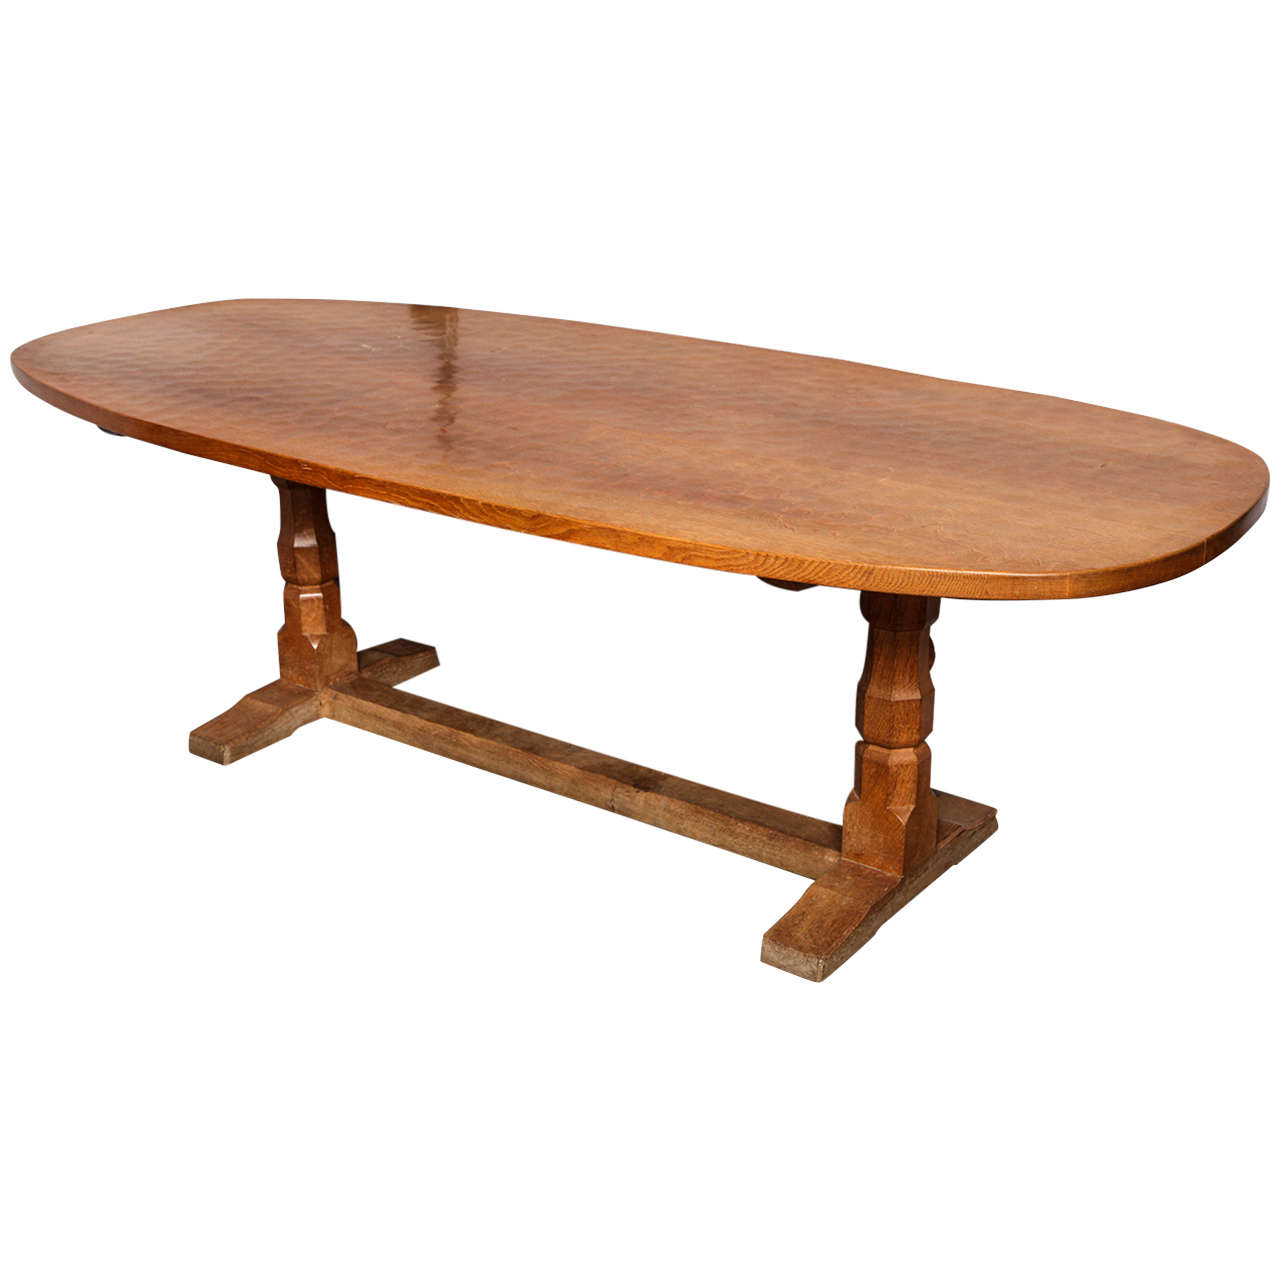 "Mouseman" Large Oval Refectory Table